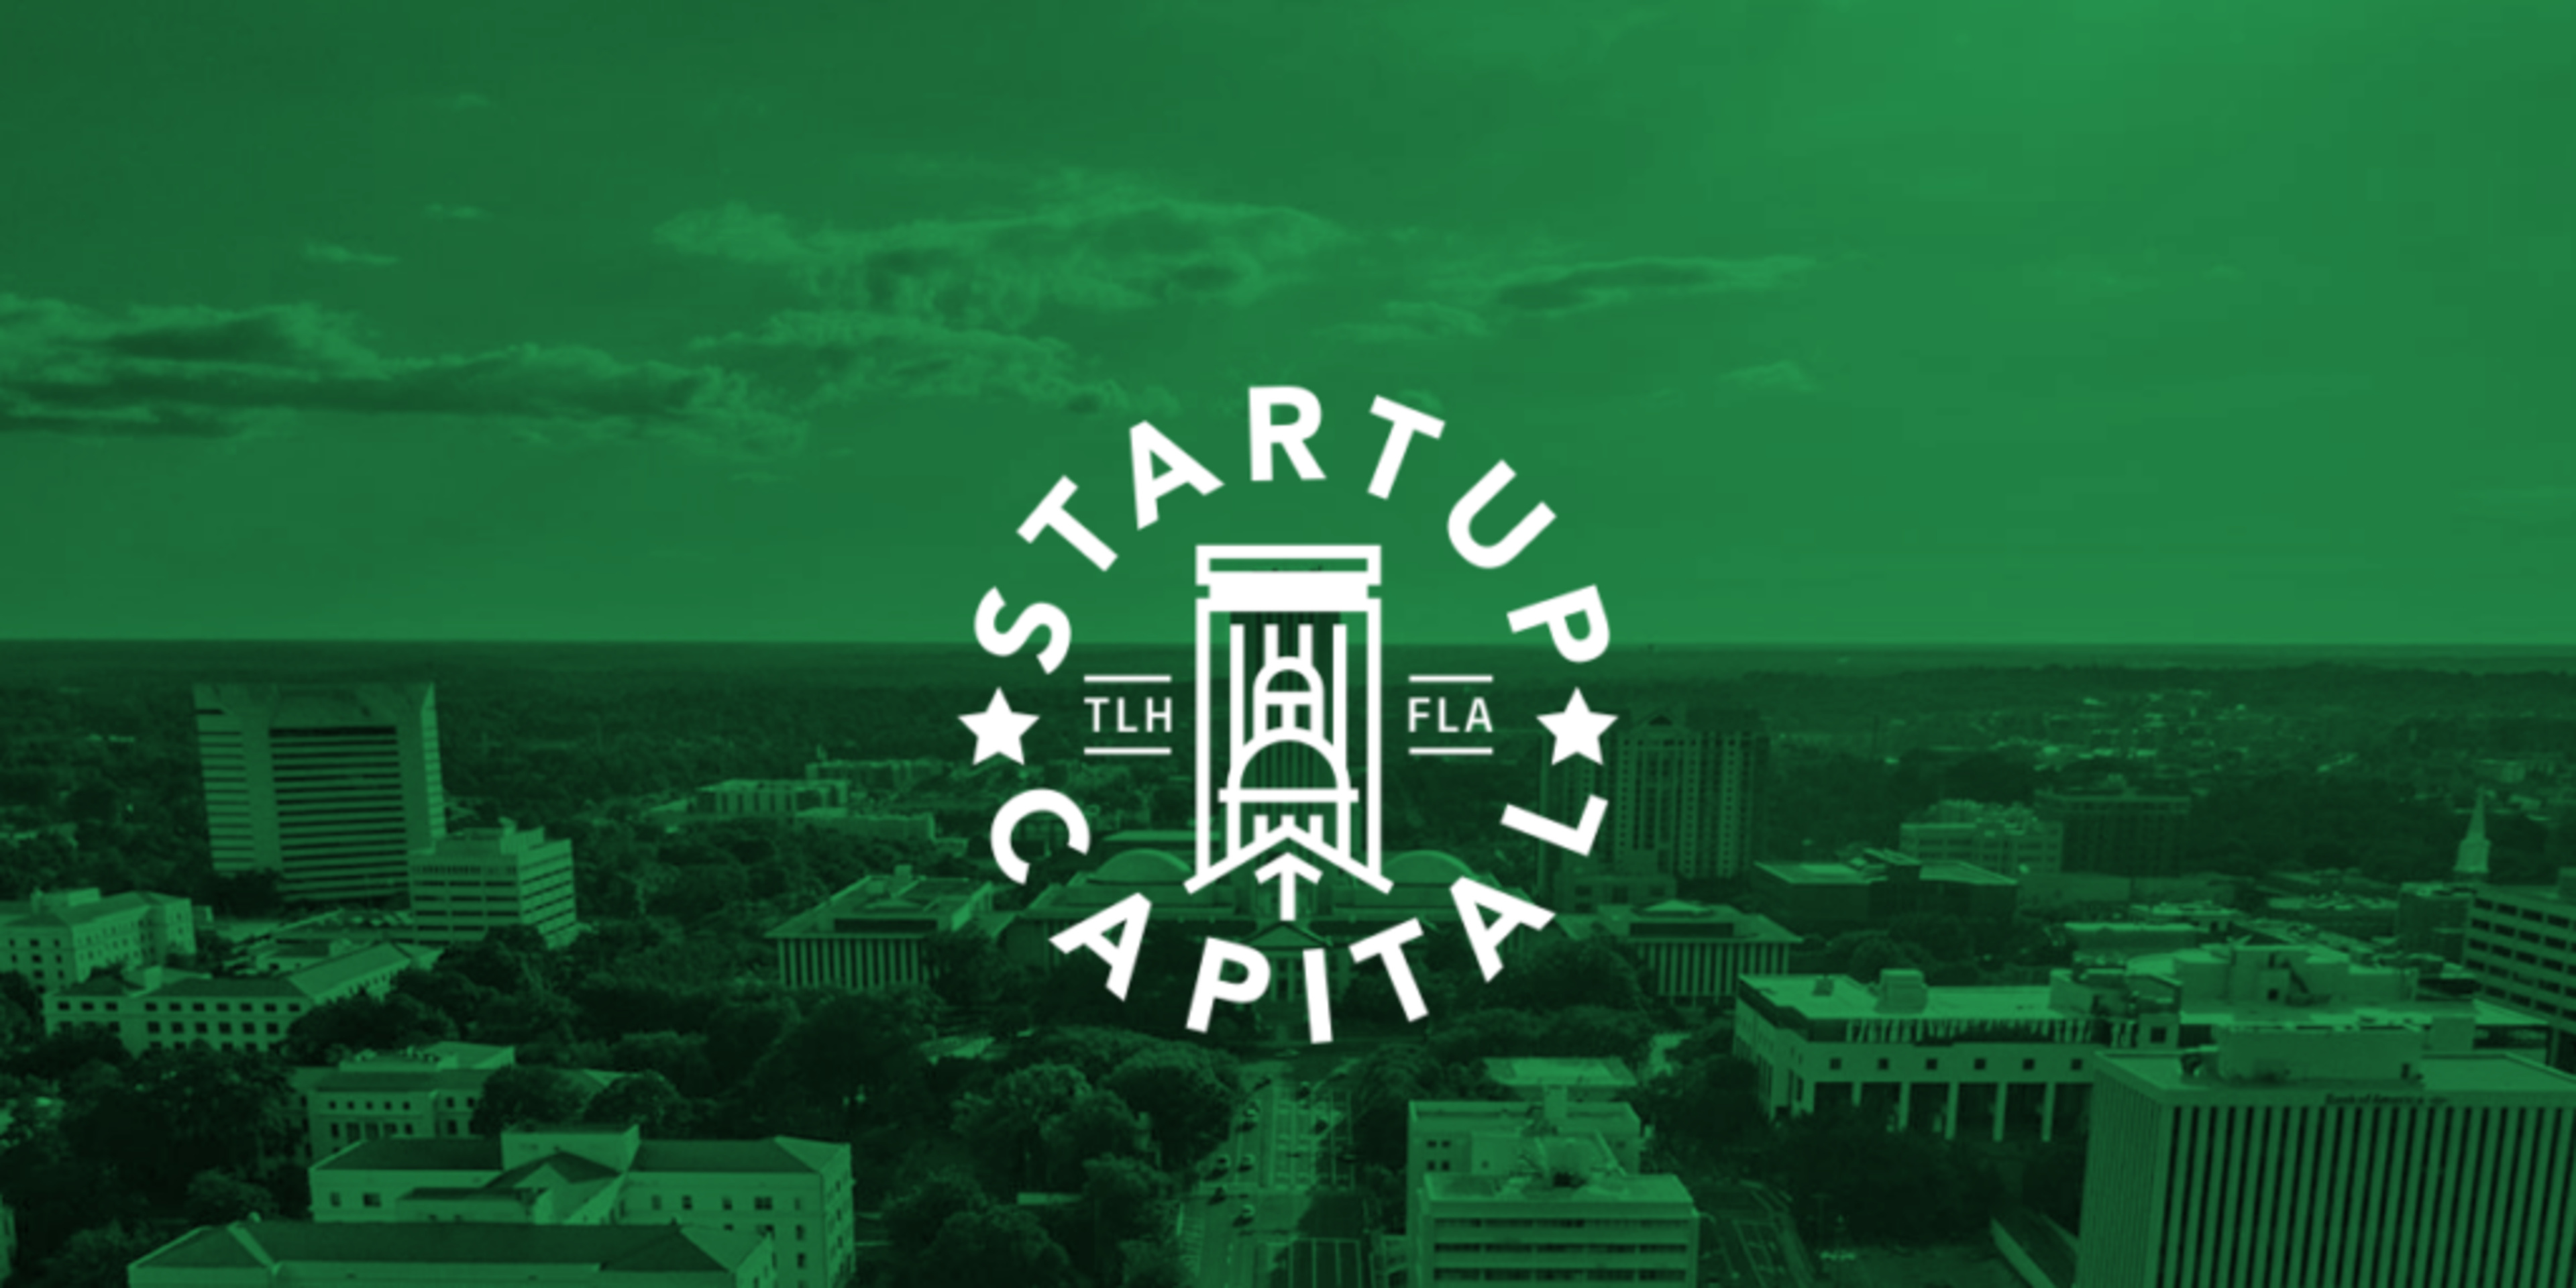 Podcast emblem of Startup Capital accentuated against the panorama of Tallahassee cityscape